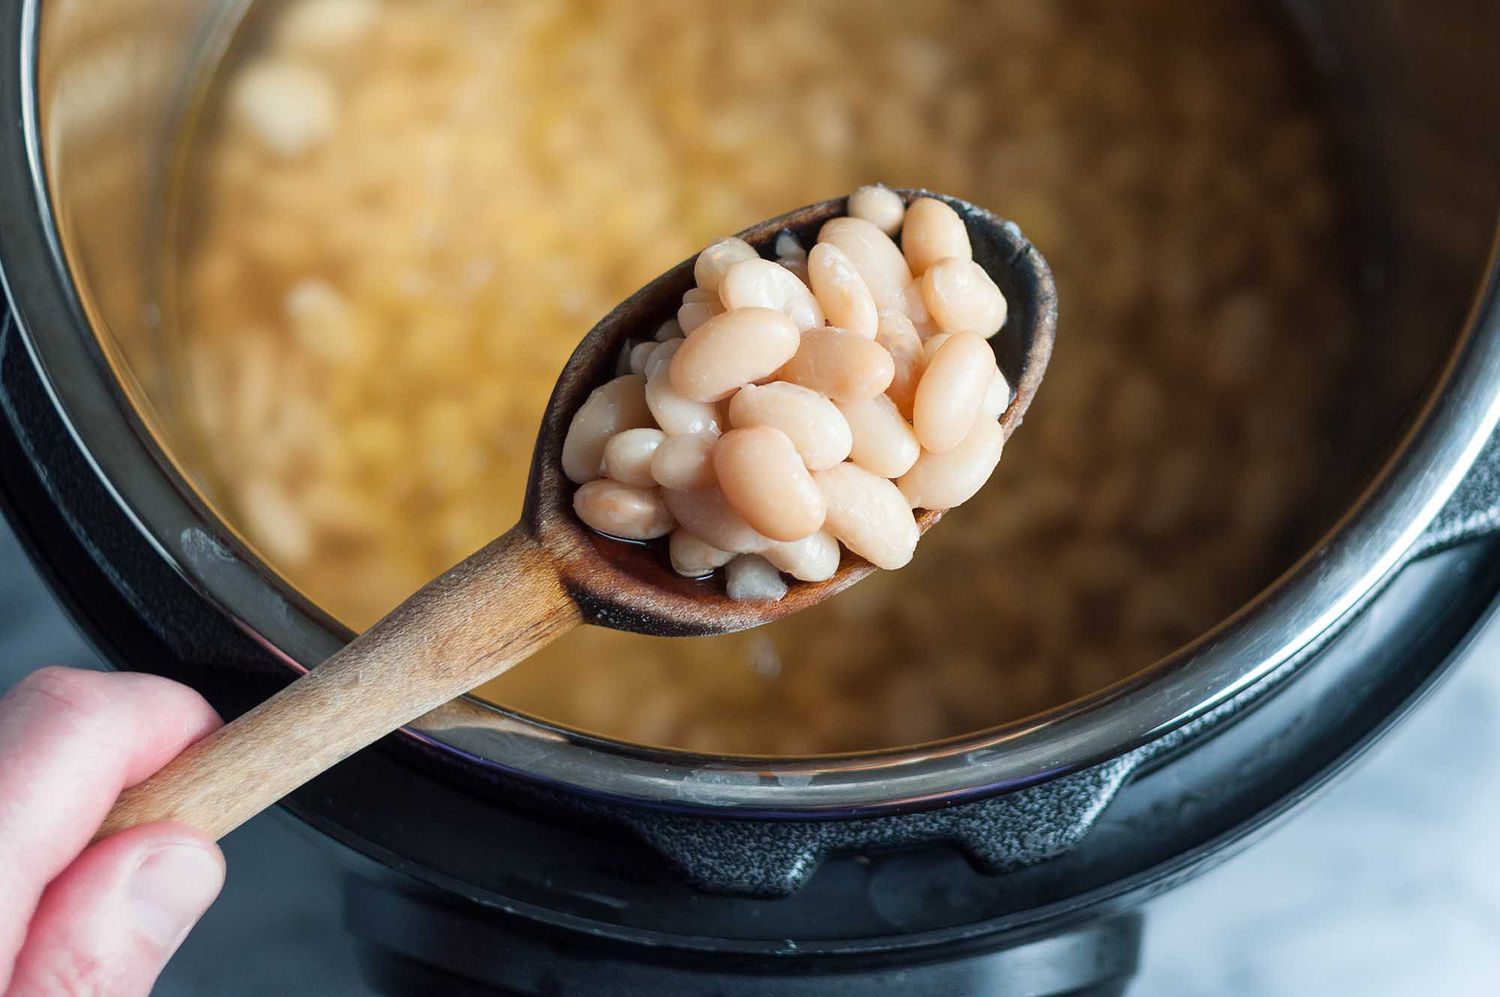 How To Cook Northern Beans In An Electric Pressure Cooker